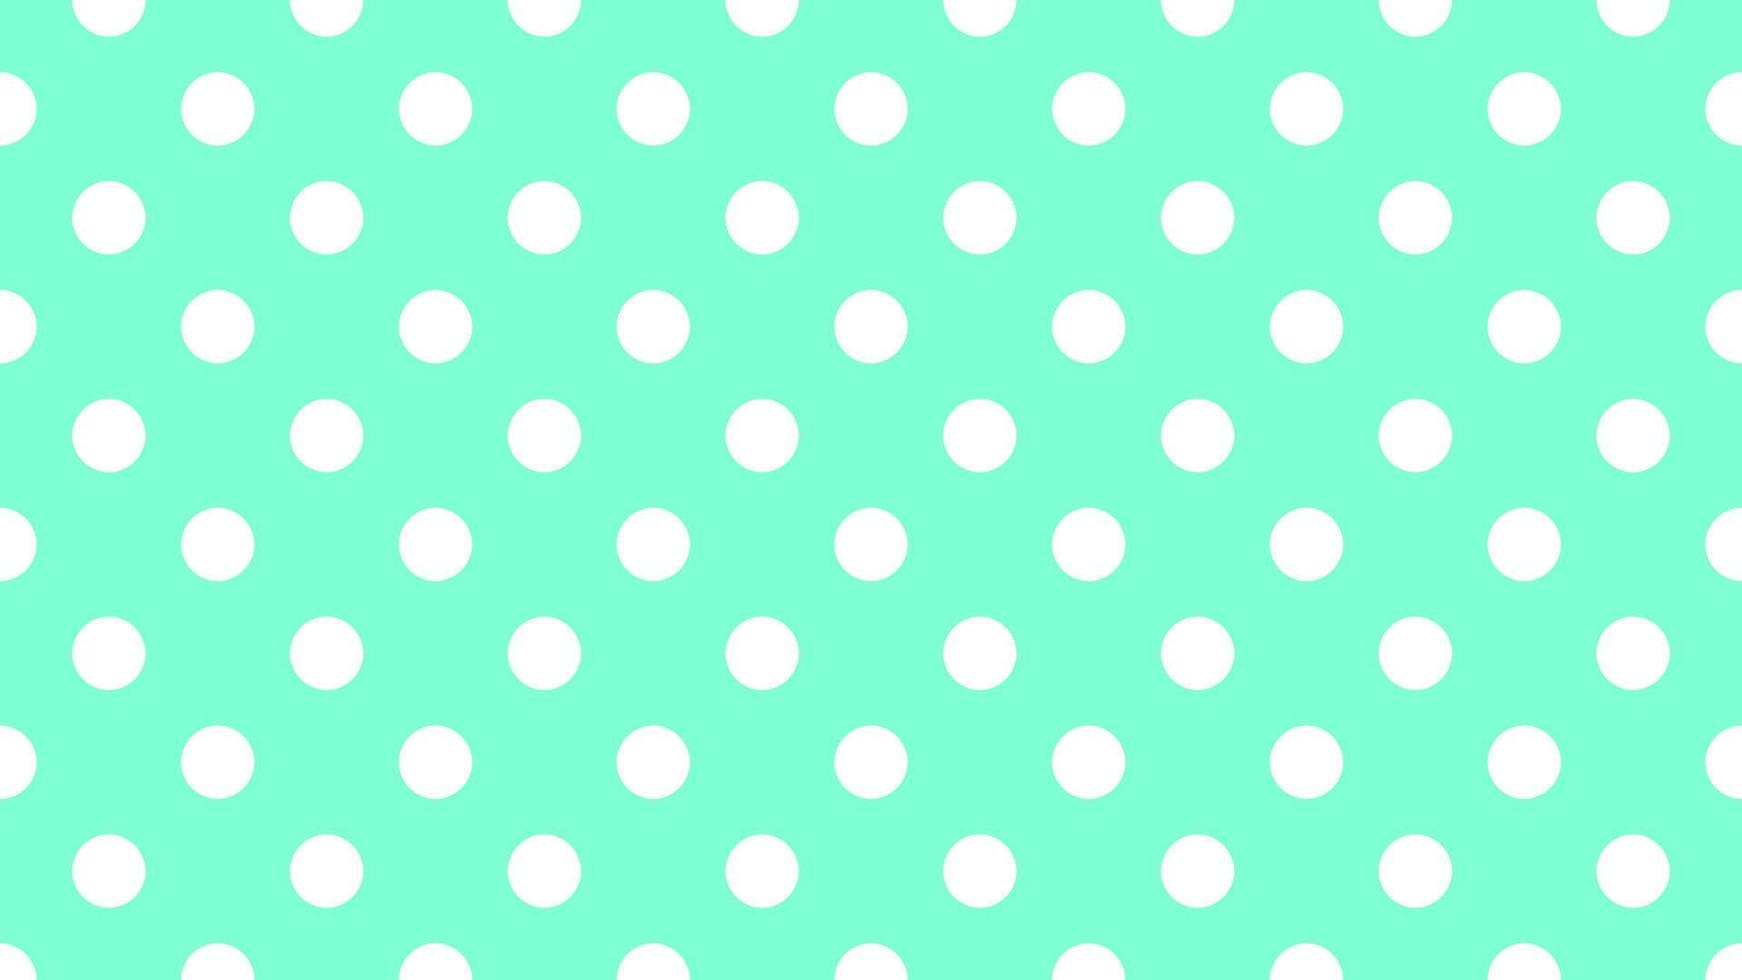 white color polka dots over aquamarine cyan background vector